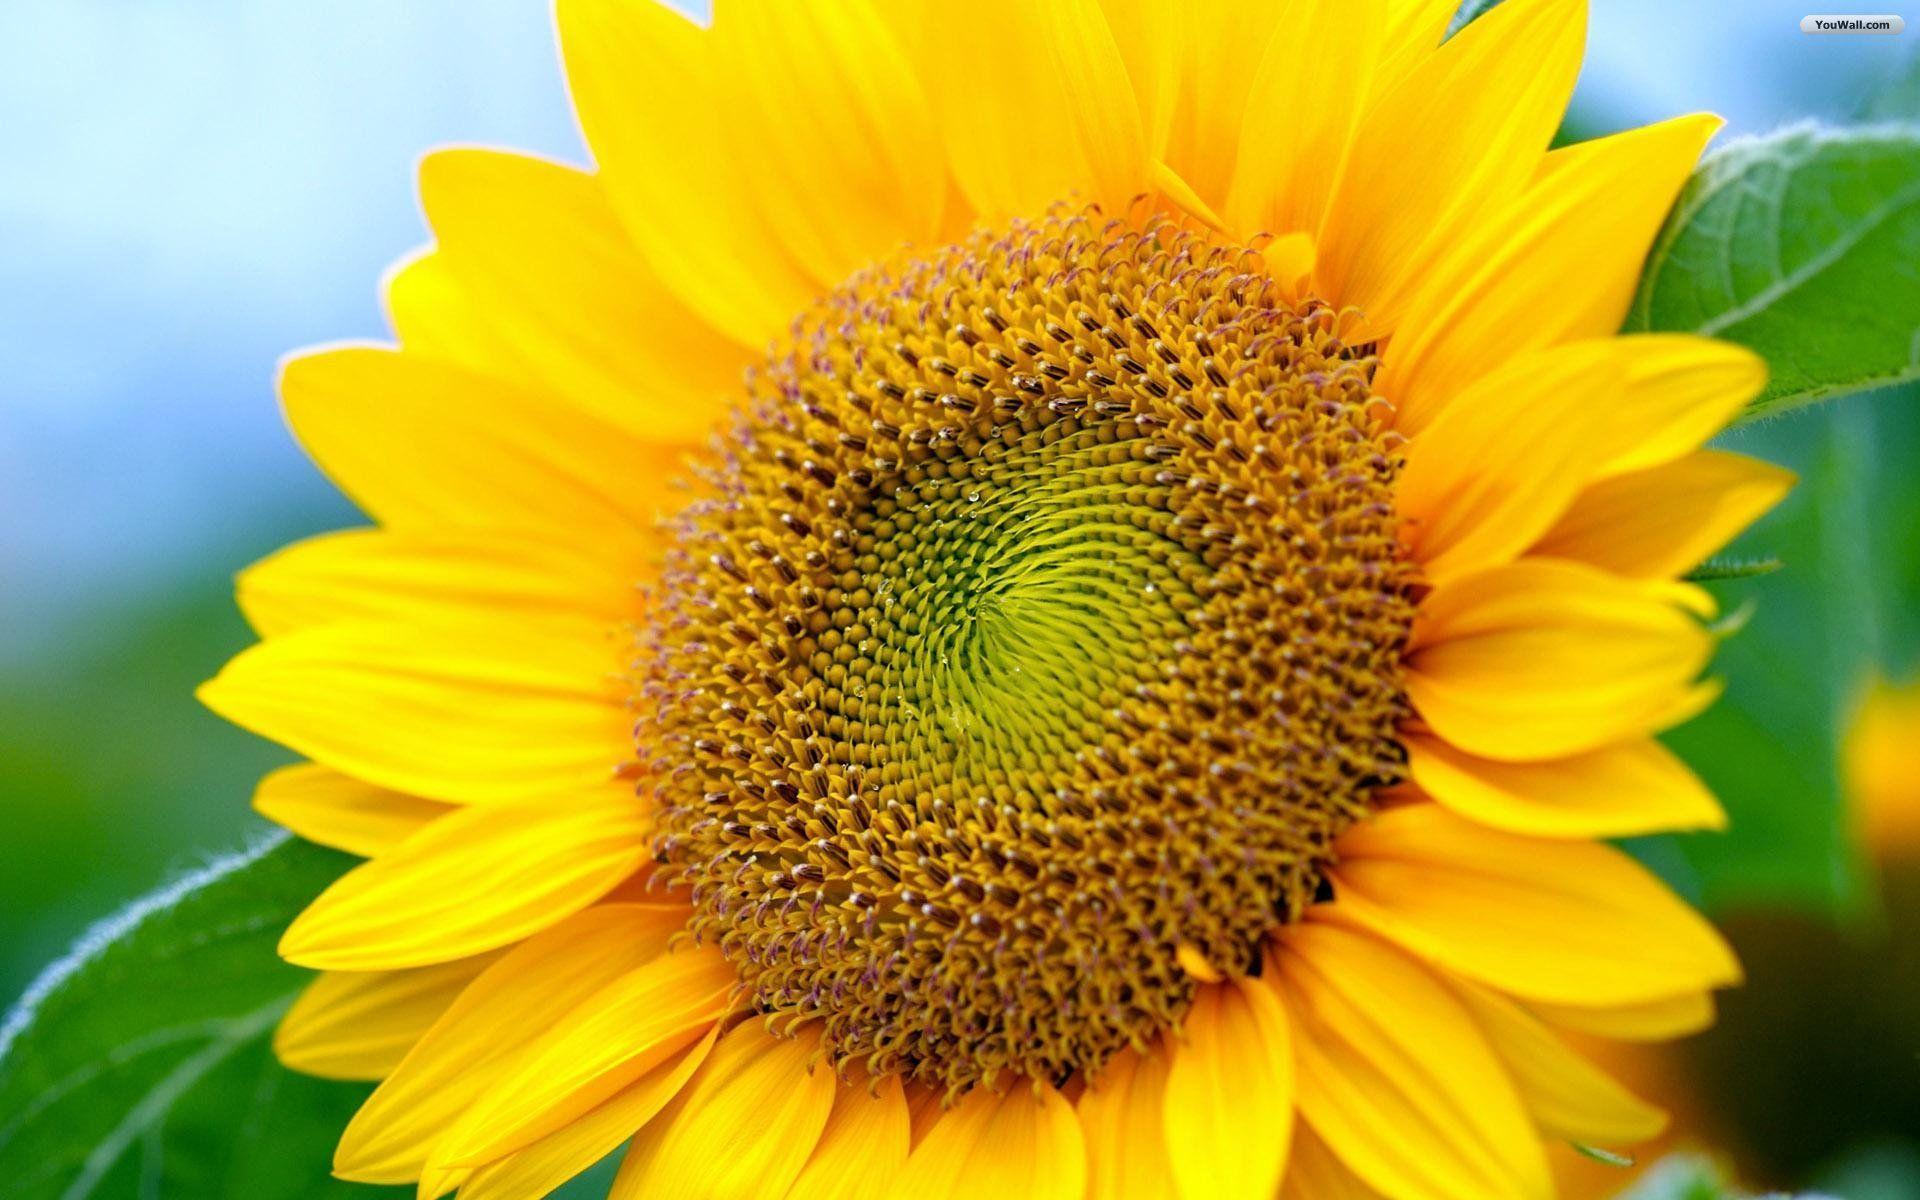 Sunflower computer wallpaper in vibrant colors